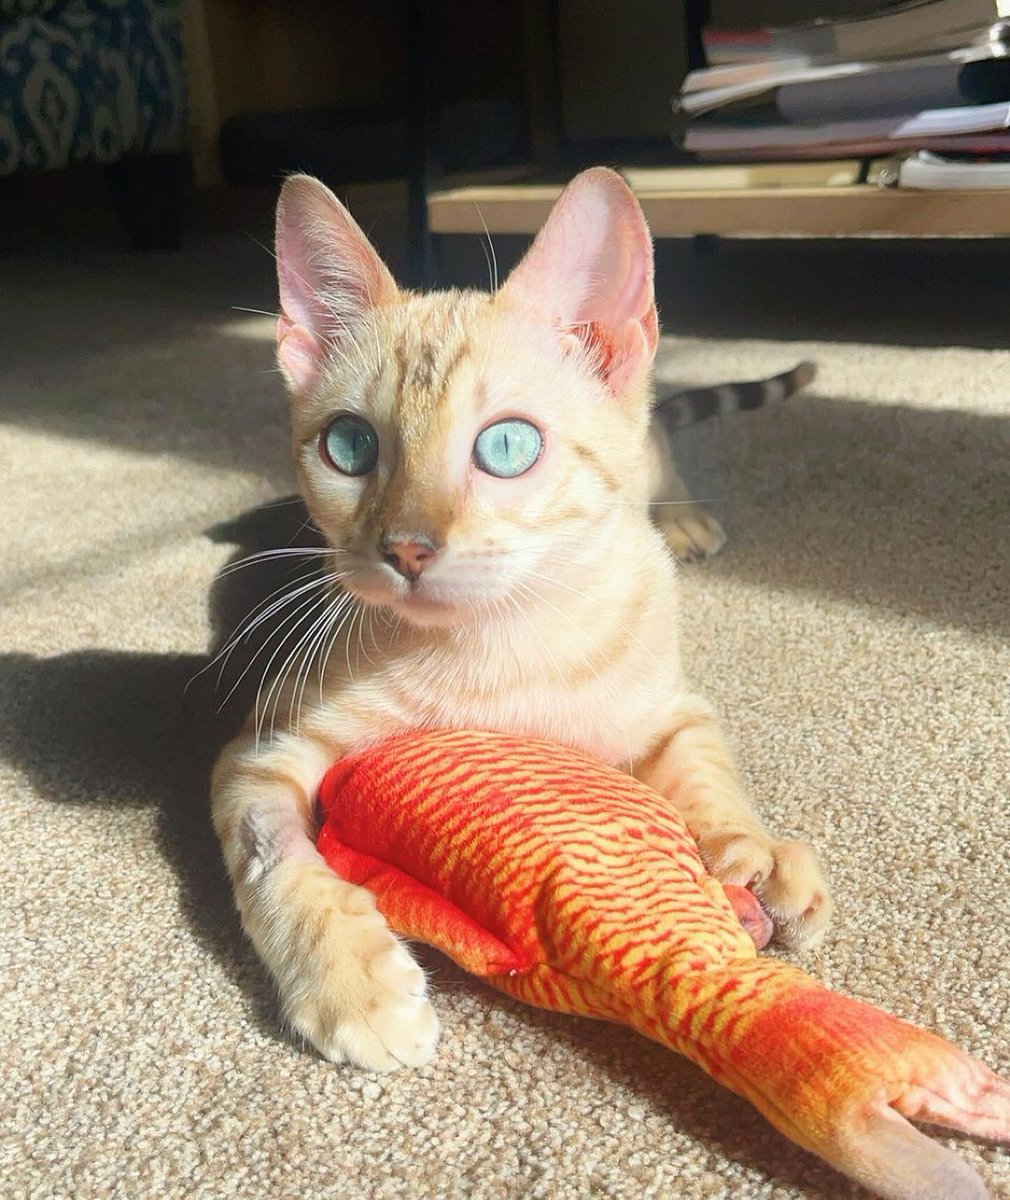 Koral is the catch of the day! In honor of Respect Your Cat Day – how are you celebrating? 😻 📷: @reefthebengal on IG